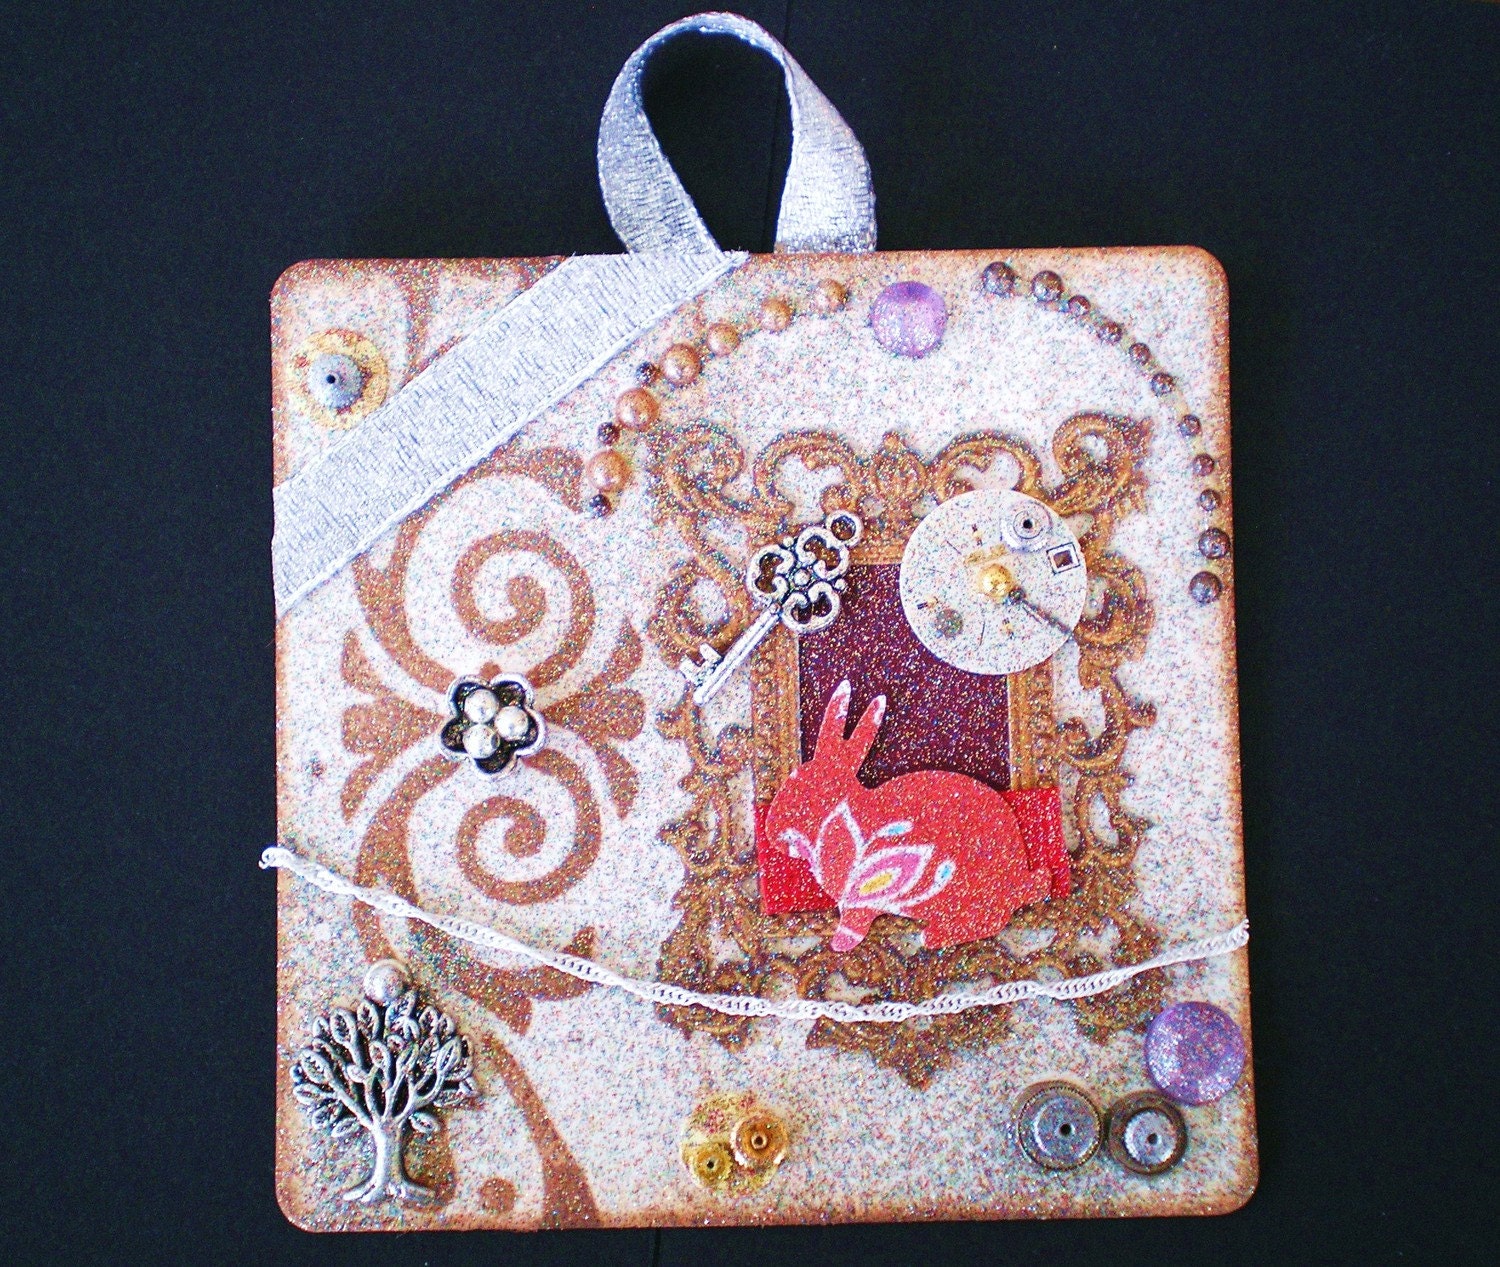 WONDERLAND Collage Mixed Media OOAK Signed on Upcycled/Recycled Cardboard Coaster with Beads Charms Rhinestone Paper Ribbon Watch Parts Silver Chain